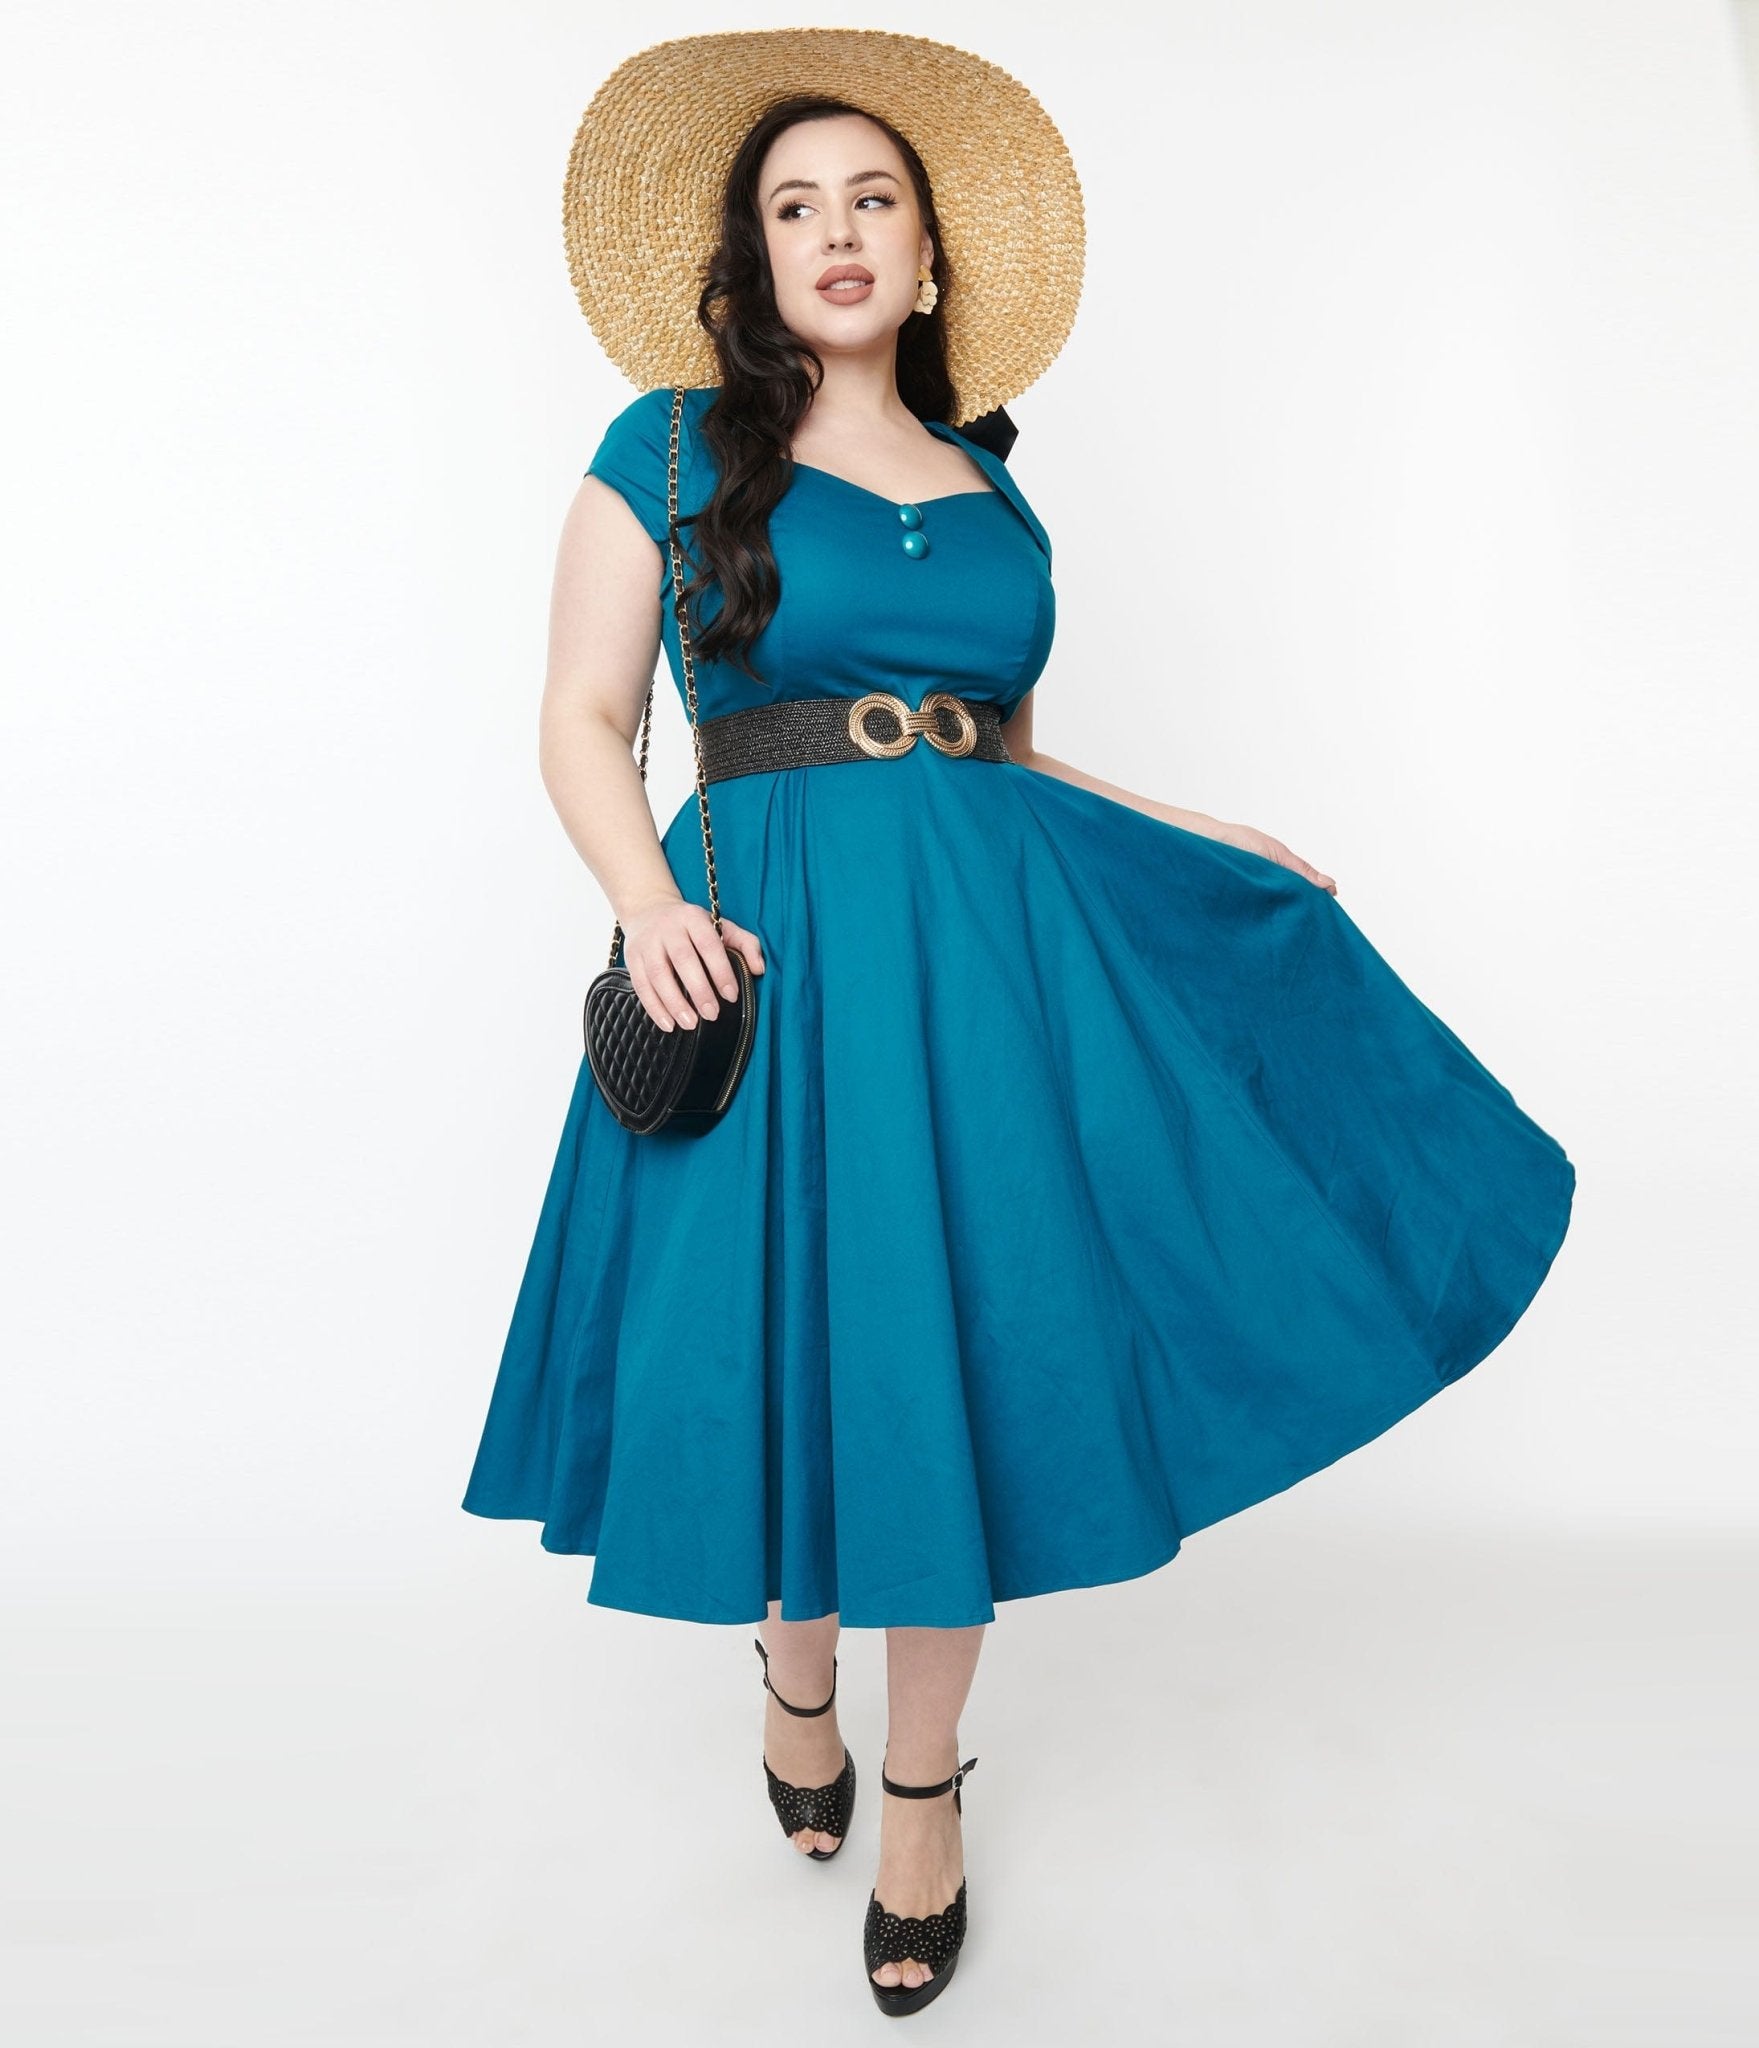 Collectif Teal Nell Swing Dress - Unique Vintage - Womens, DRESSES, SWING